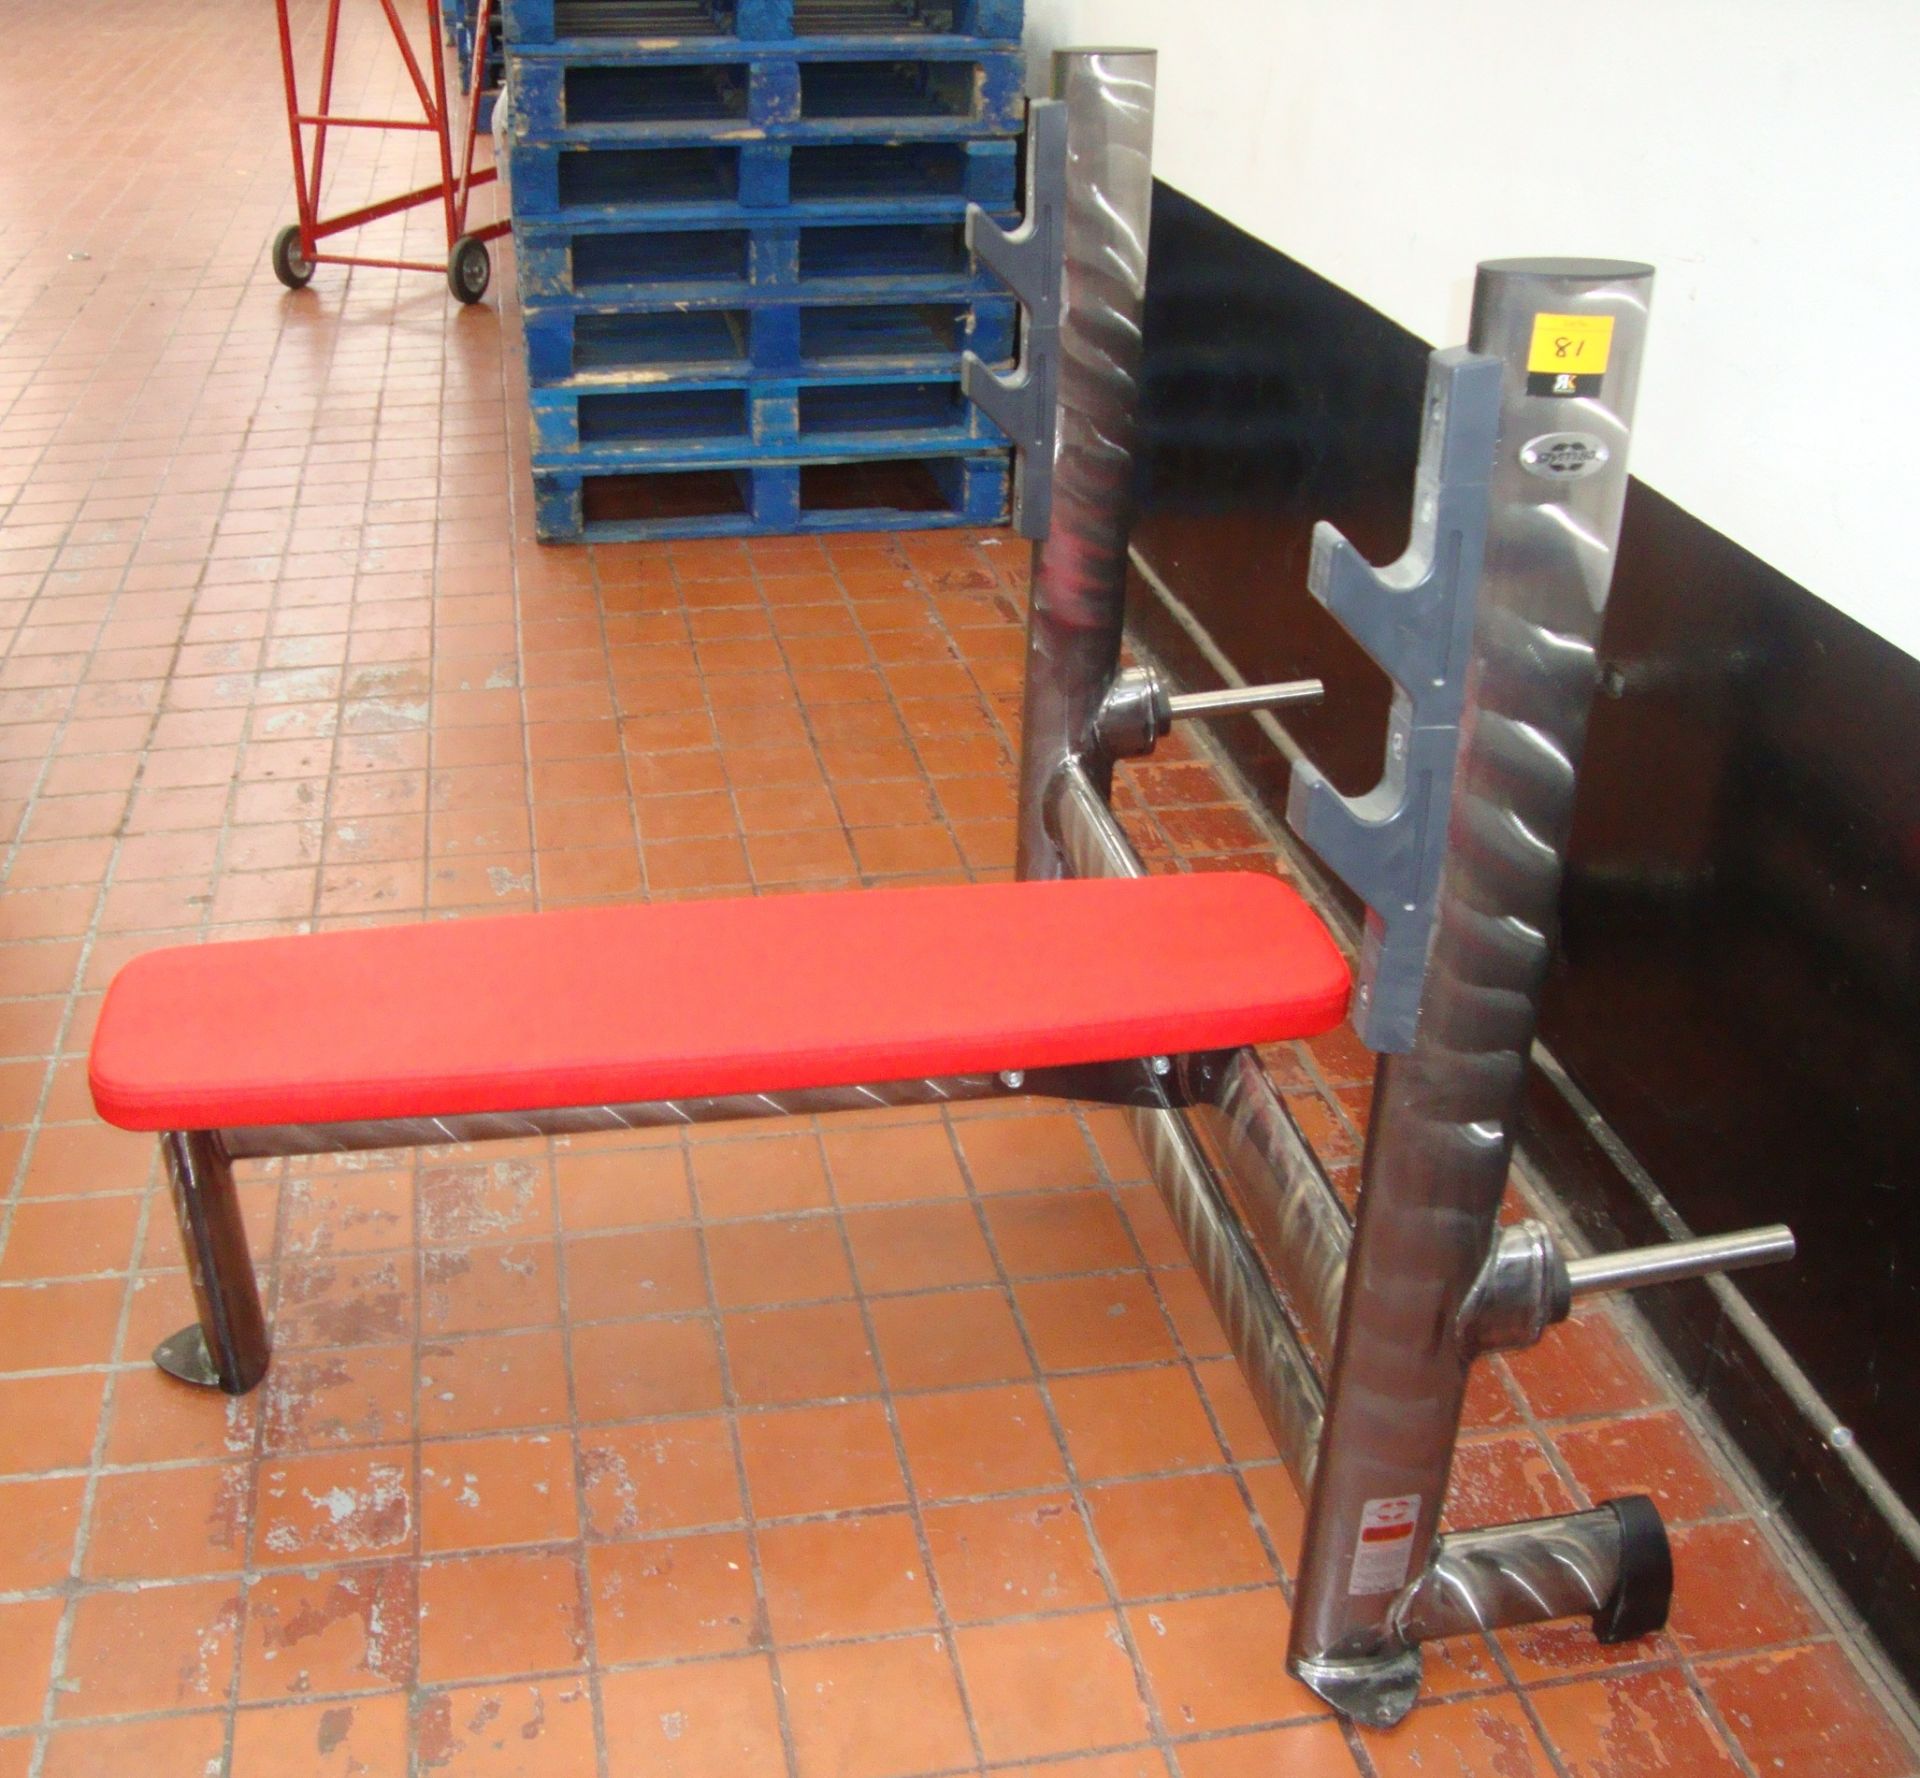 Gym 80 Sygnum press bench, with silver frame & red upholstery, understood to have been purchased new - Image 3 of 6